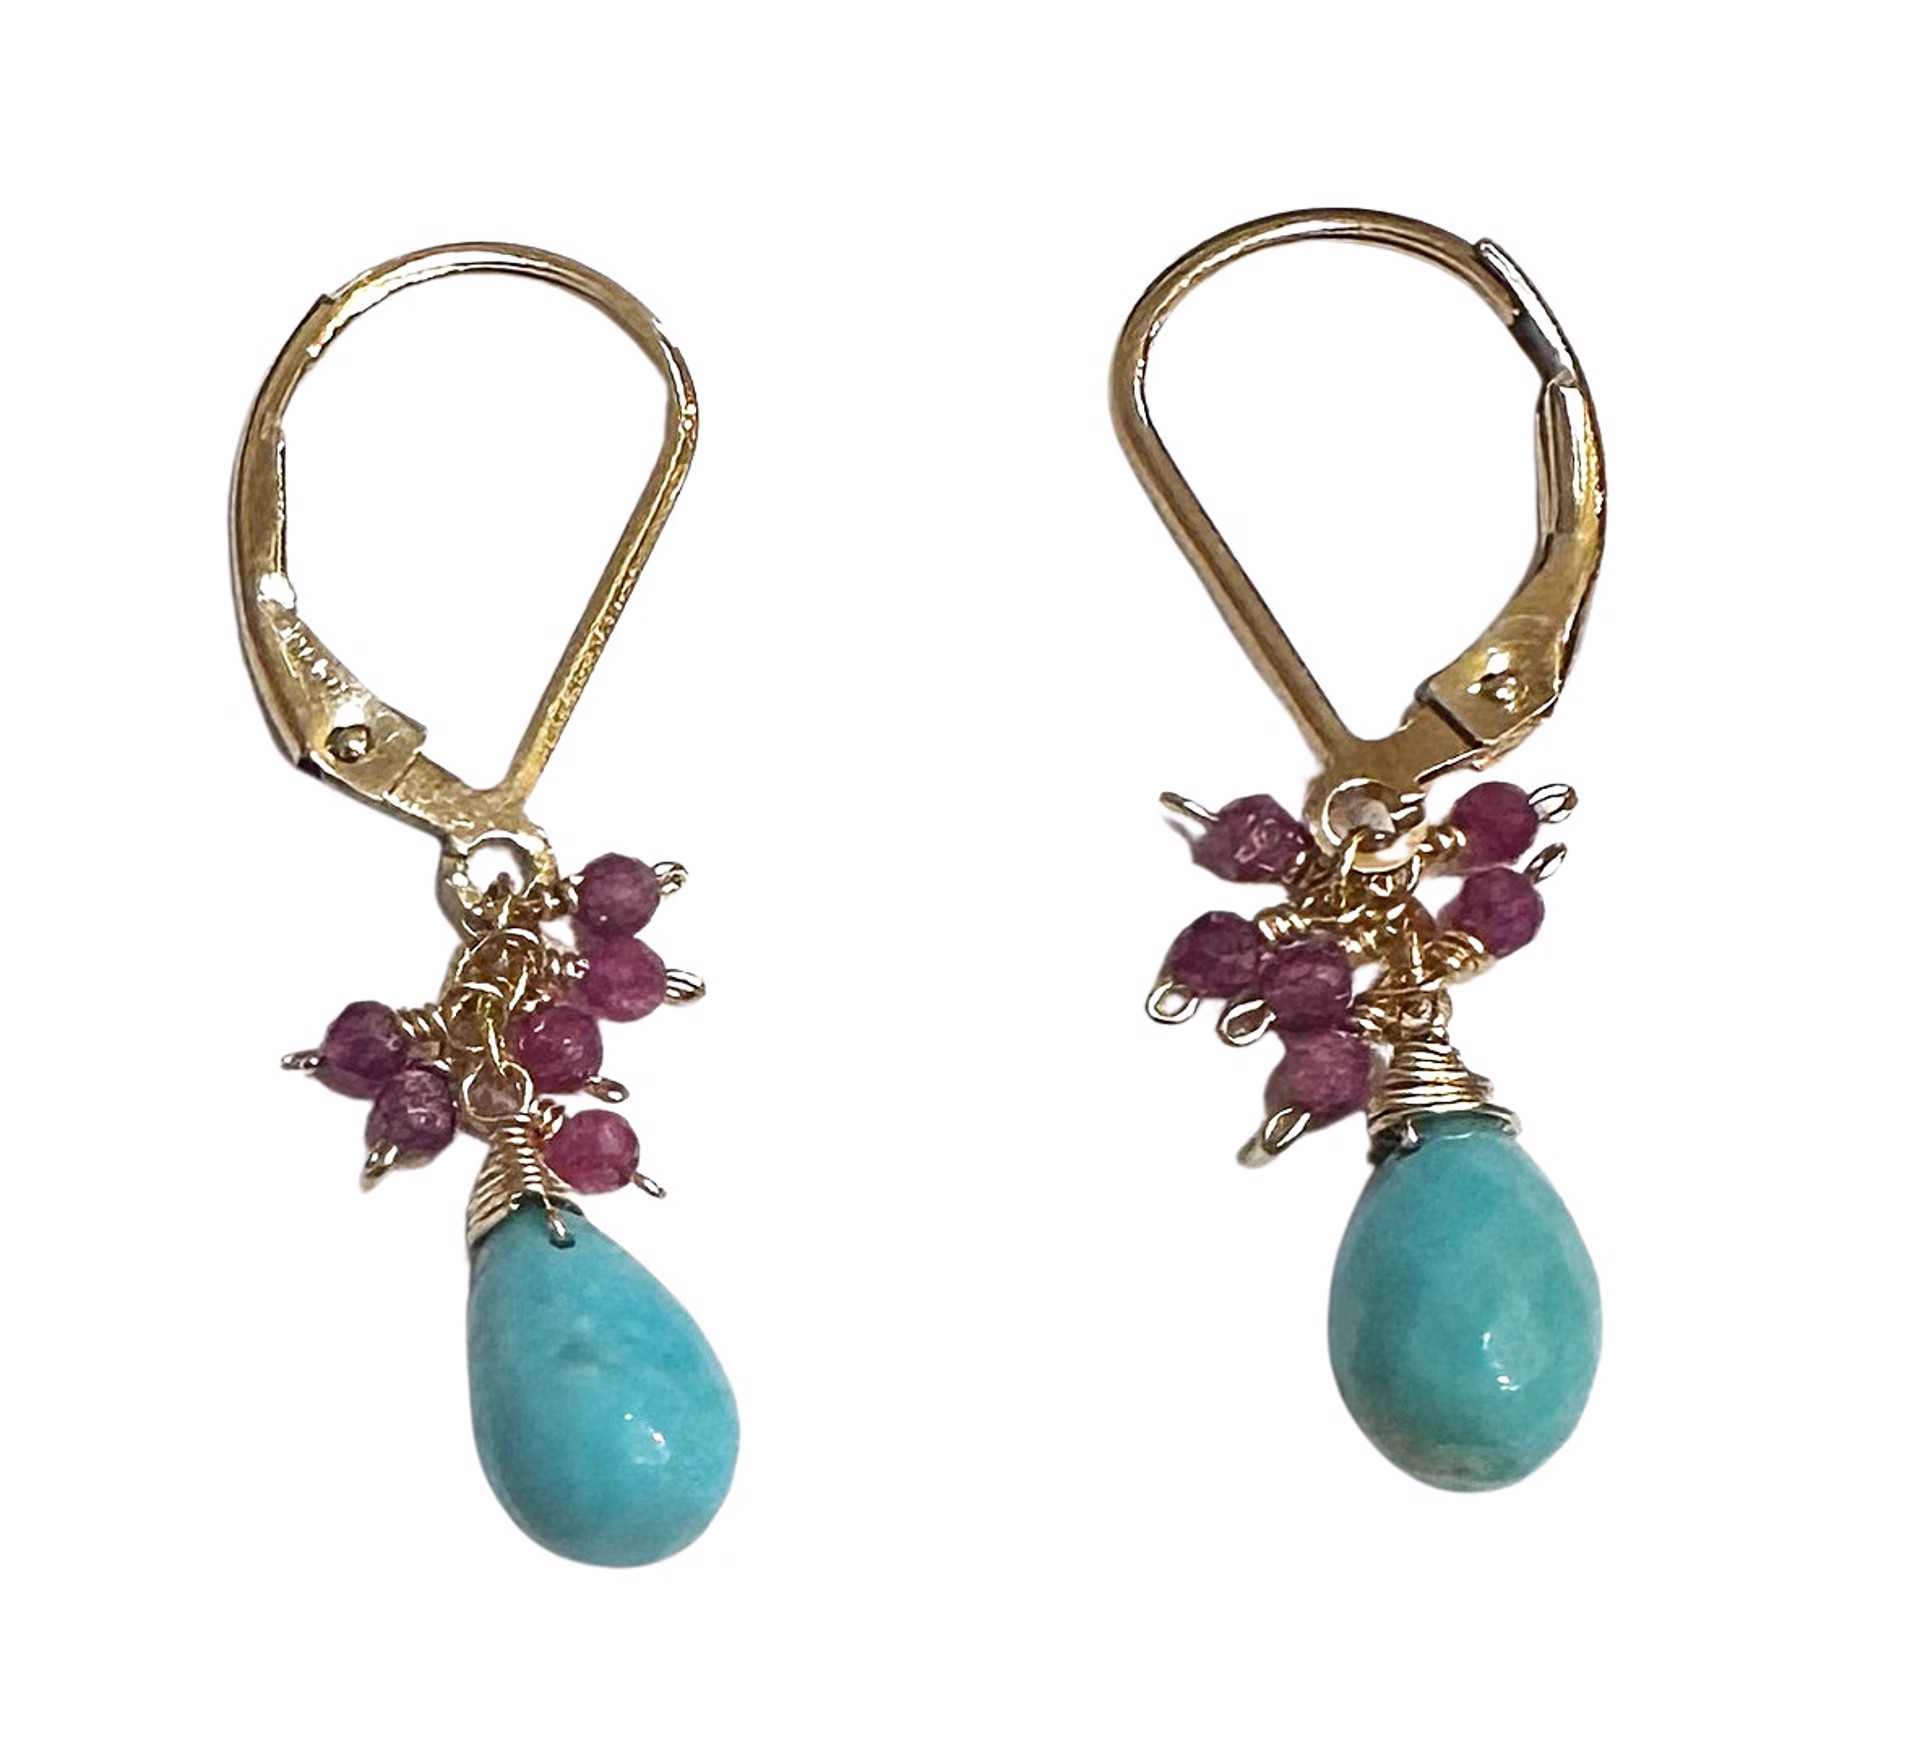 Earrings - Ruby and Turquoise with 14K Gold by Julia Balestracci